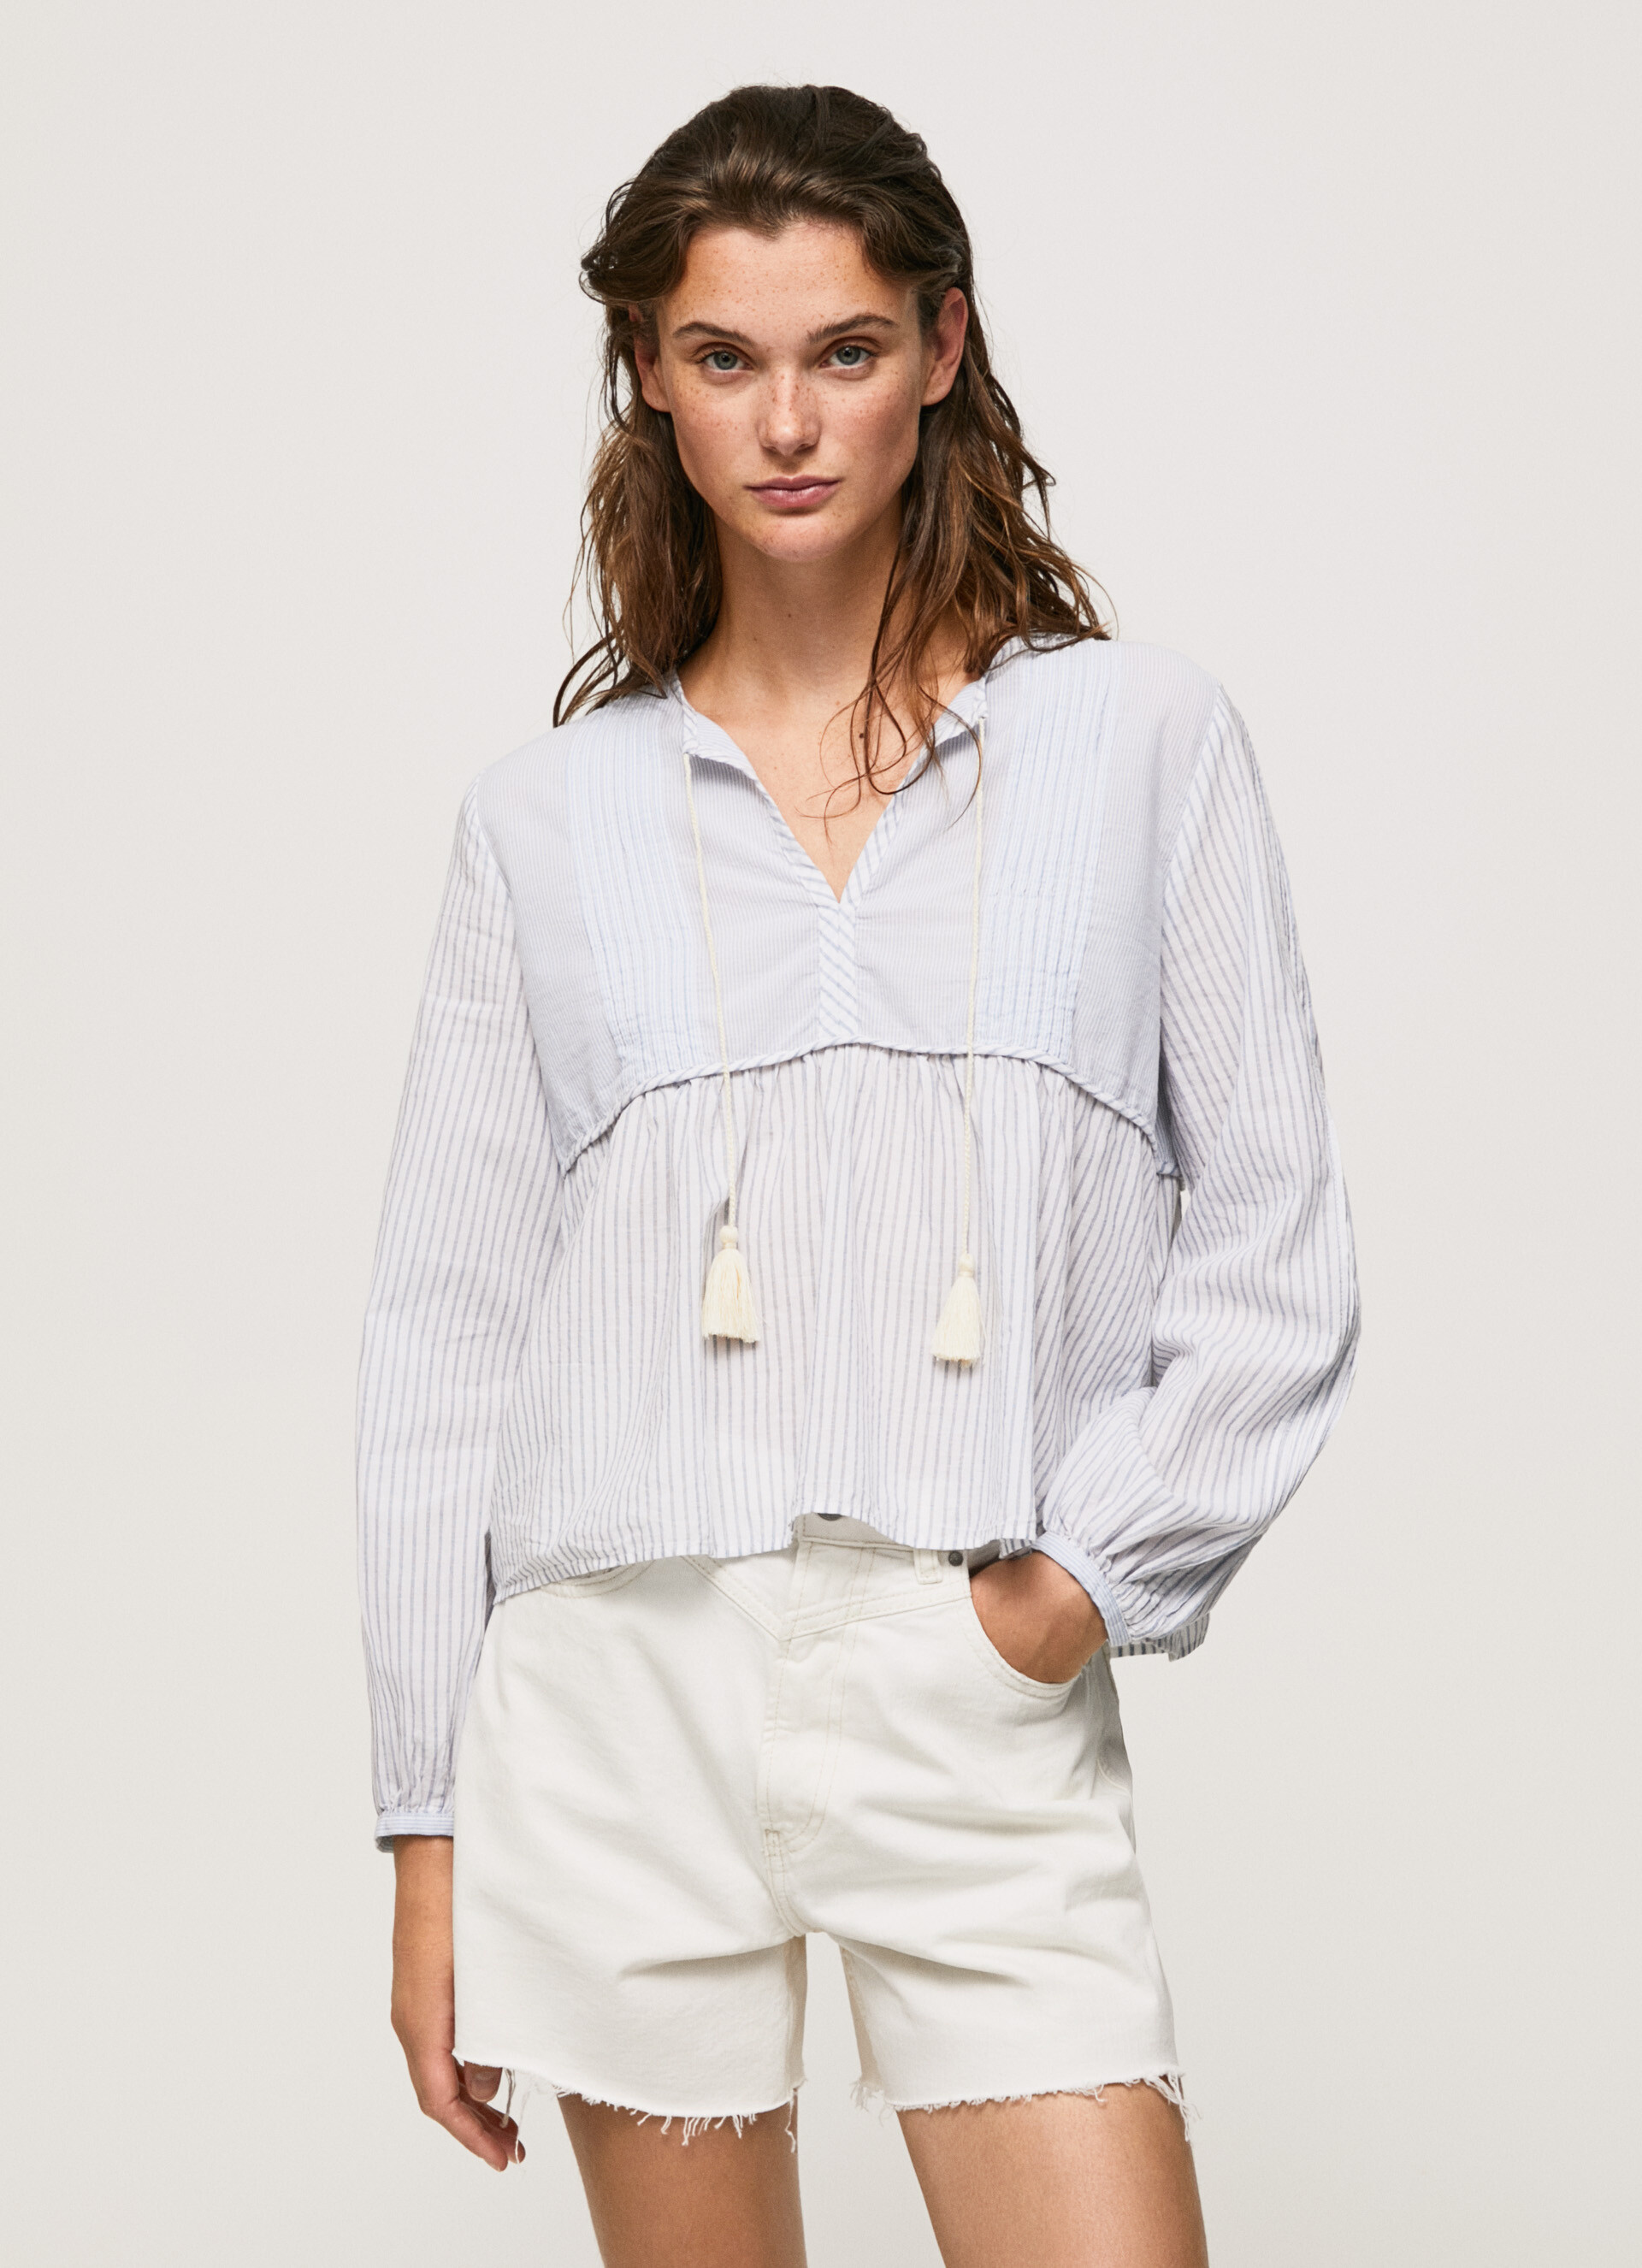 Pepe Jeans - Striped blouse, Light Blue, large image number 3